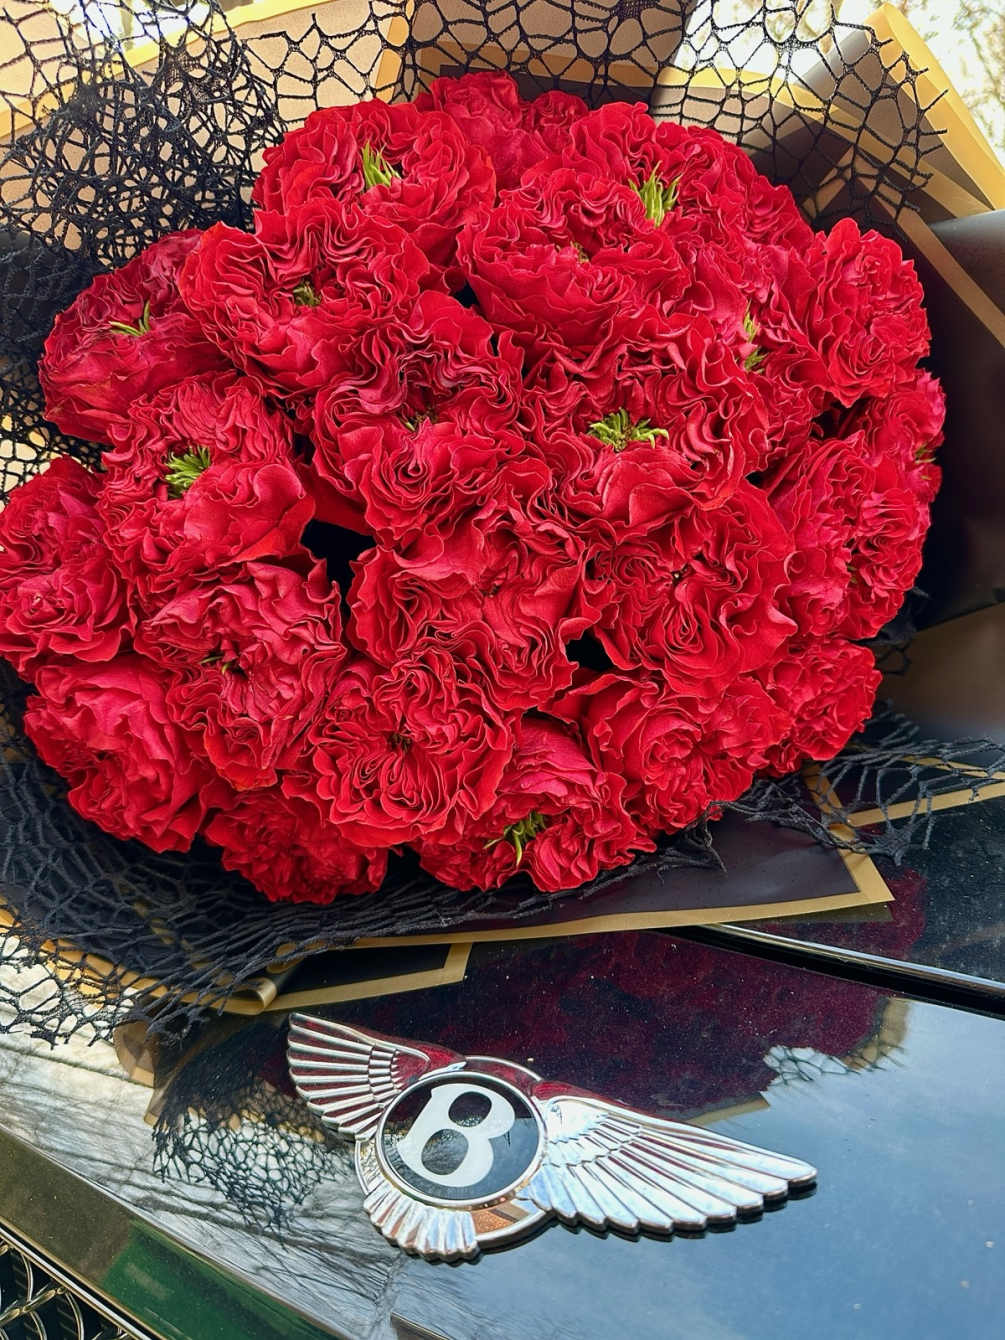 These luxury red garden roses are sure to be the talk of